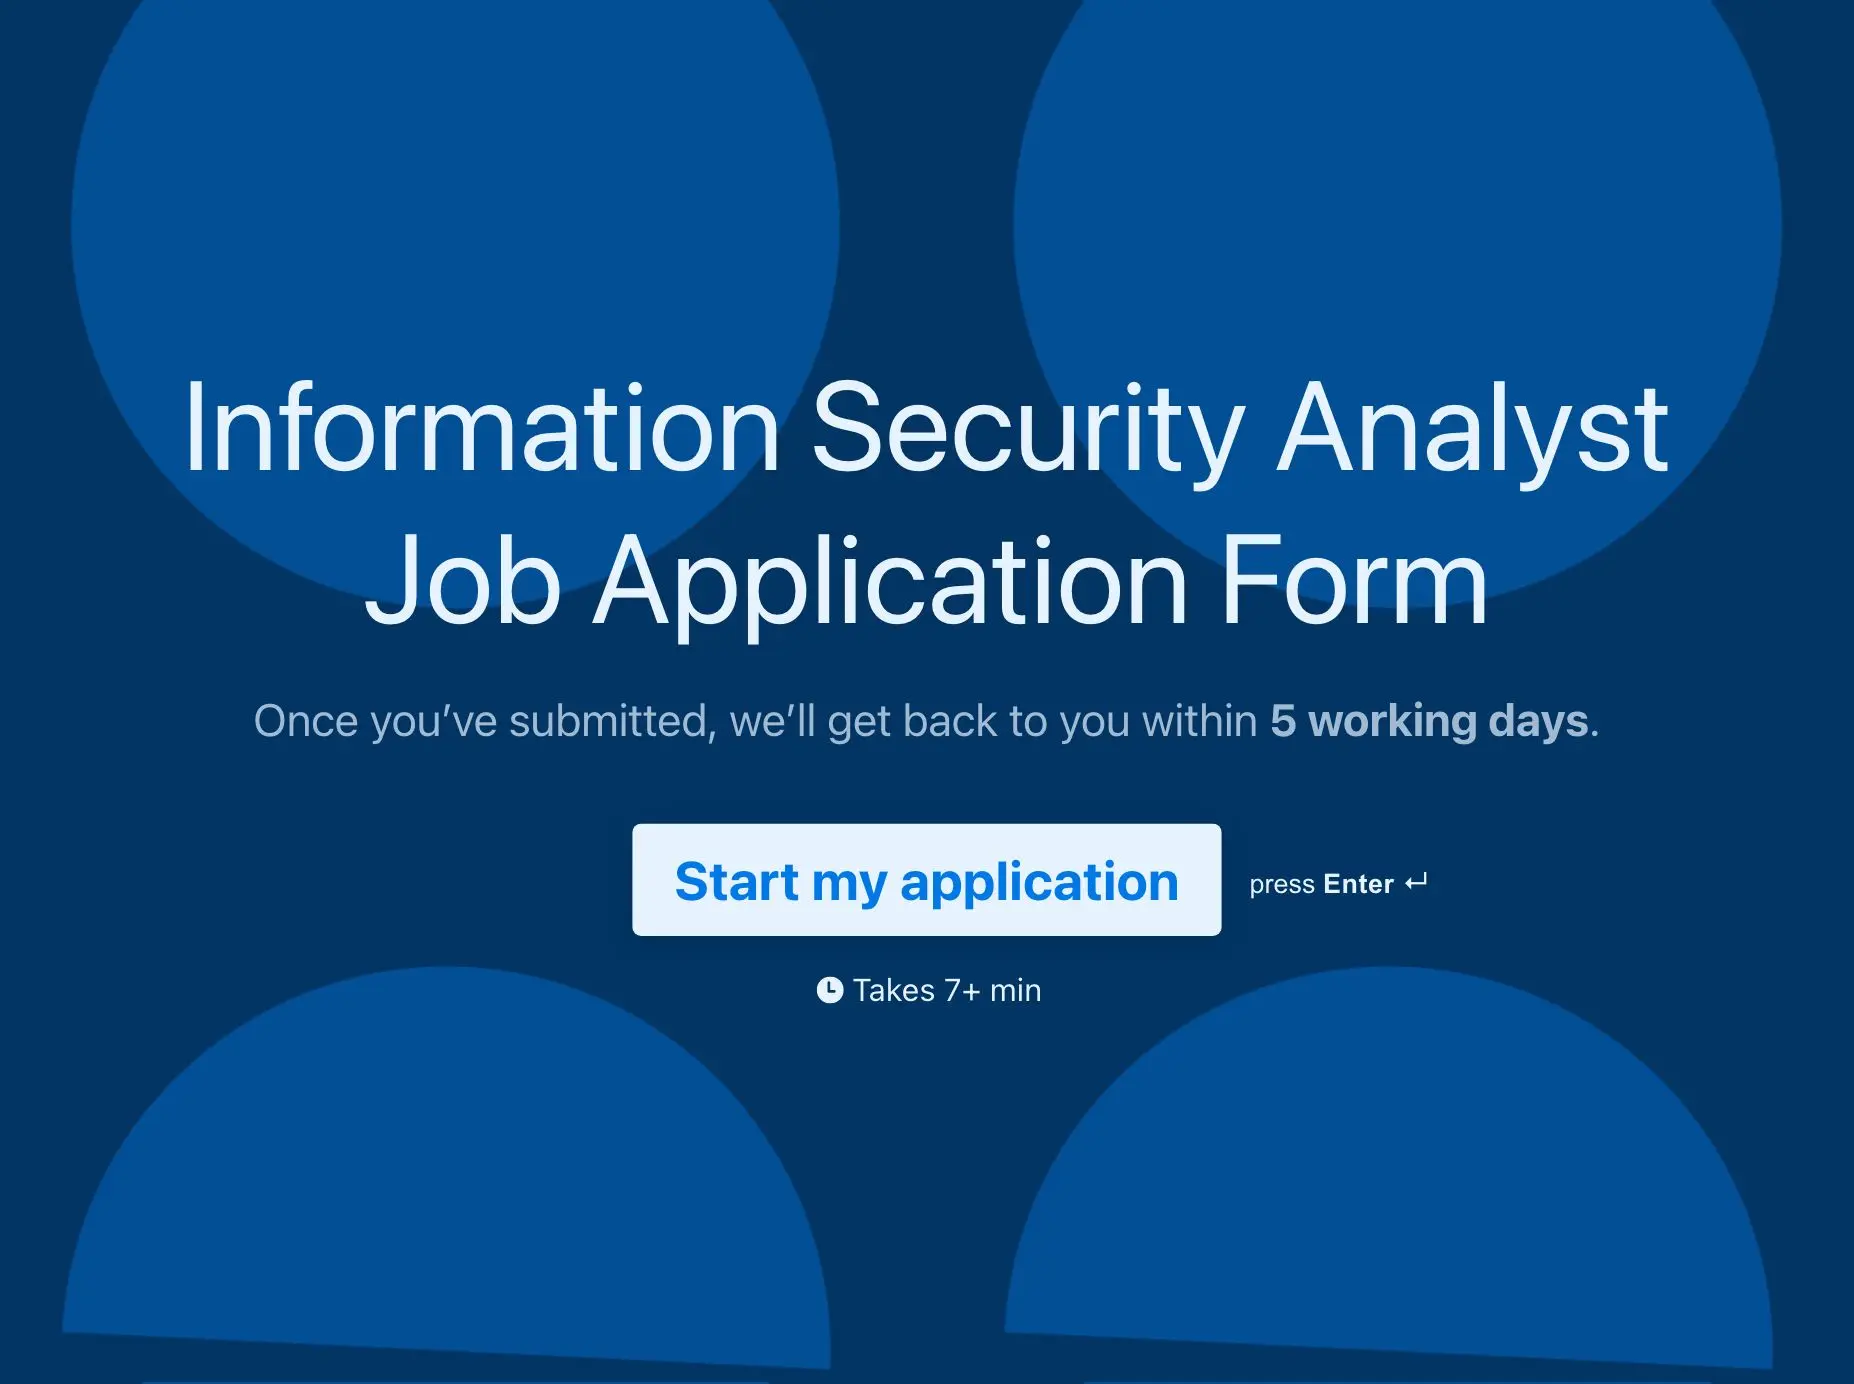 Information Security Analyst Job Application Form Template Hero